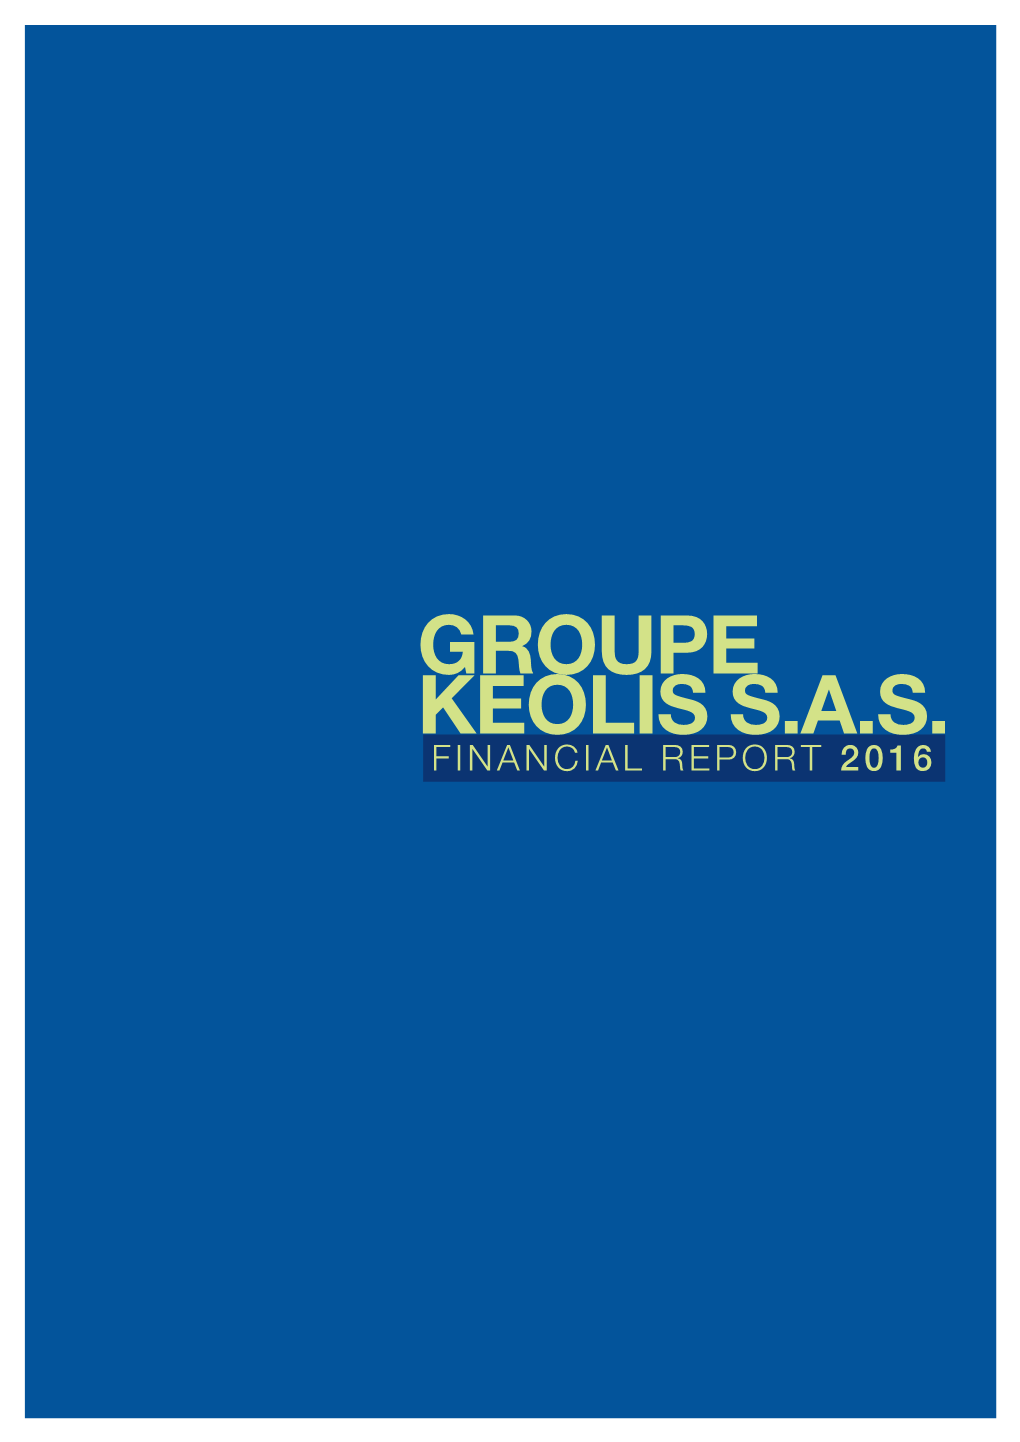 GROUPE Keolis S.A.S. FINANCIAL REPORT 2016 CONTENTS